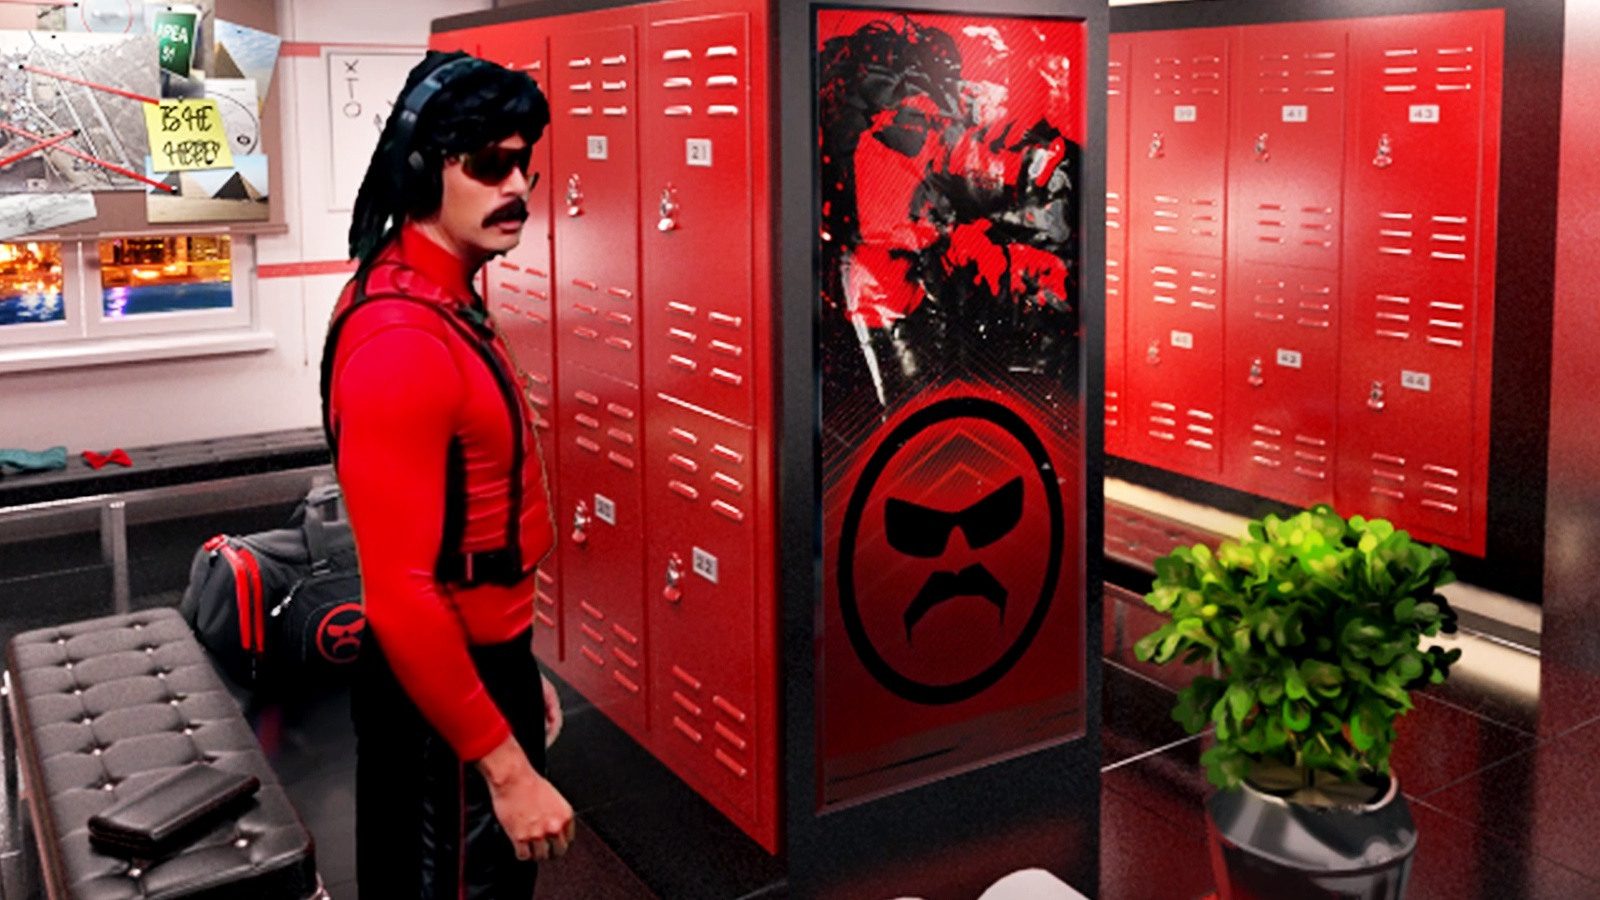 Dr Disrespect shares rousing tips on how to become more confident like him  - Dexerto